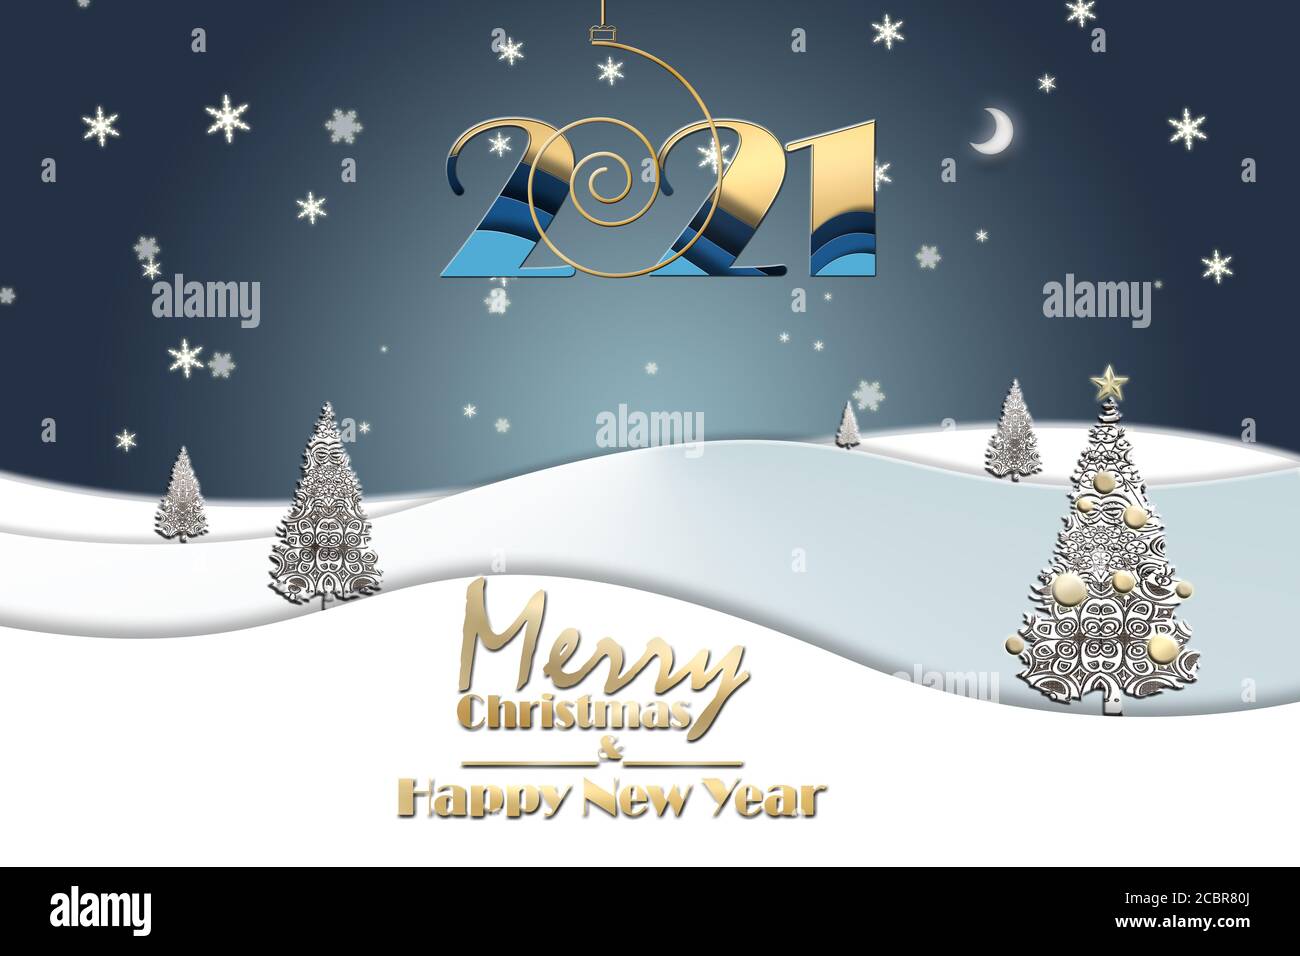 21 New Year Elegant Greeting Landscape With Shining Gold Christmas Trees Made Of Snowflakes On Blue Background And Hanging Gold Digit 21 Text Merry Christmas Happy New Year 3d Illustration Stock Photo Alamy